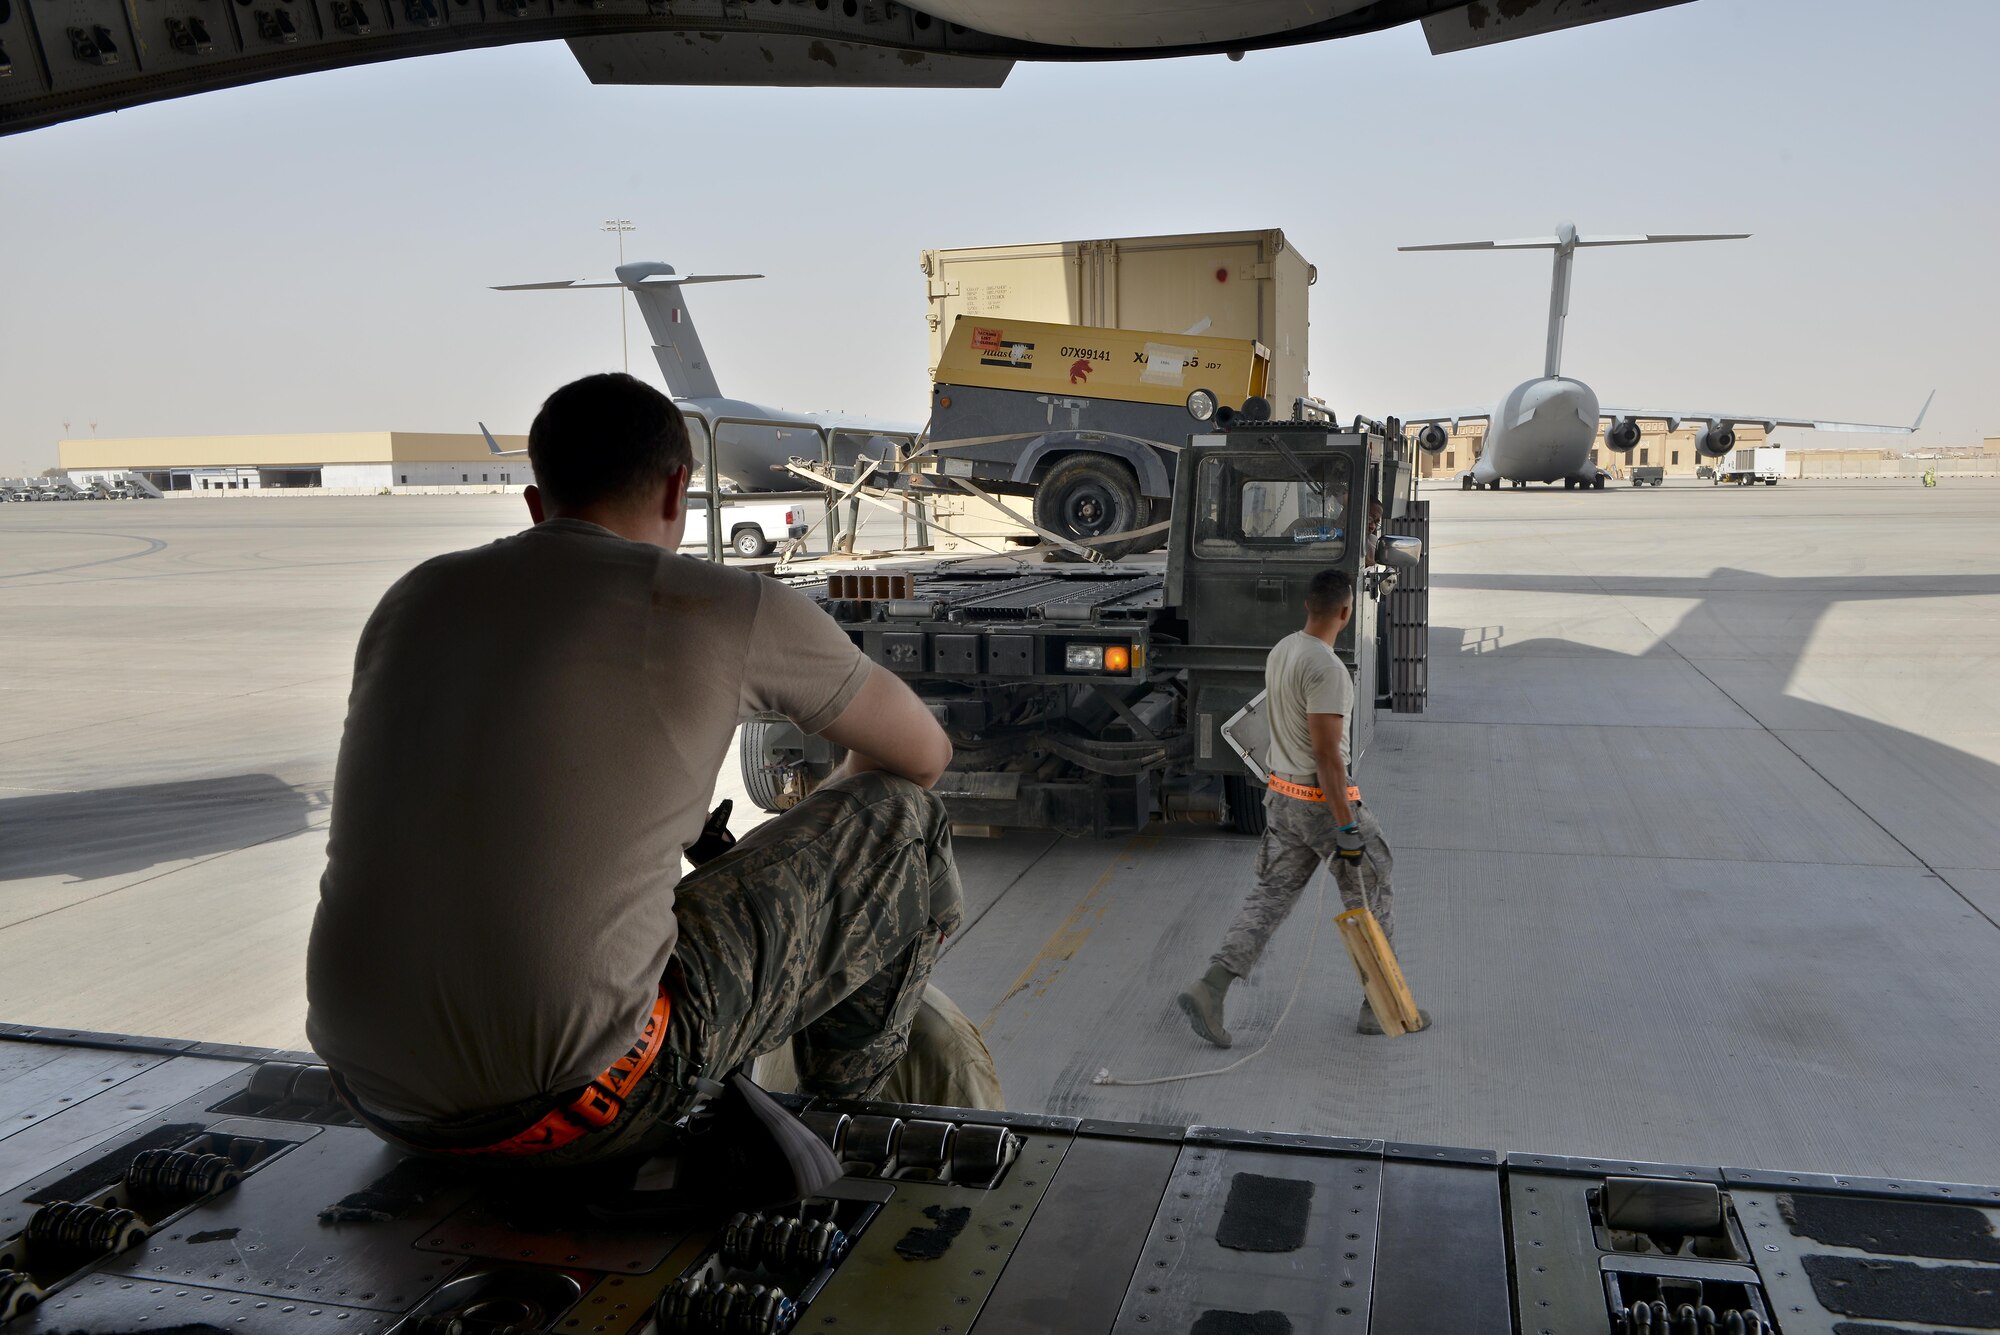 Airmen from the 8th Expeditionary Air Mobility Squadron realign a 25K loader up to a C-17 Globemaster aircraft prior to take off May 13, 2015 at Al Udeid Air Base, Qatar. Airmen from separate squadrons deployed to Al Udeid helped support a mission for forward deployed members of RED HORSE Civil Engineering to repair a runway in Southwest Asia in support of Operation Inherent Resolve. (U.S. Air Force photo/Staff Sgt. Alexandre Montes)